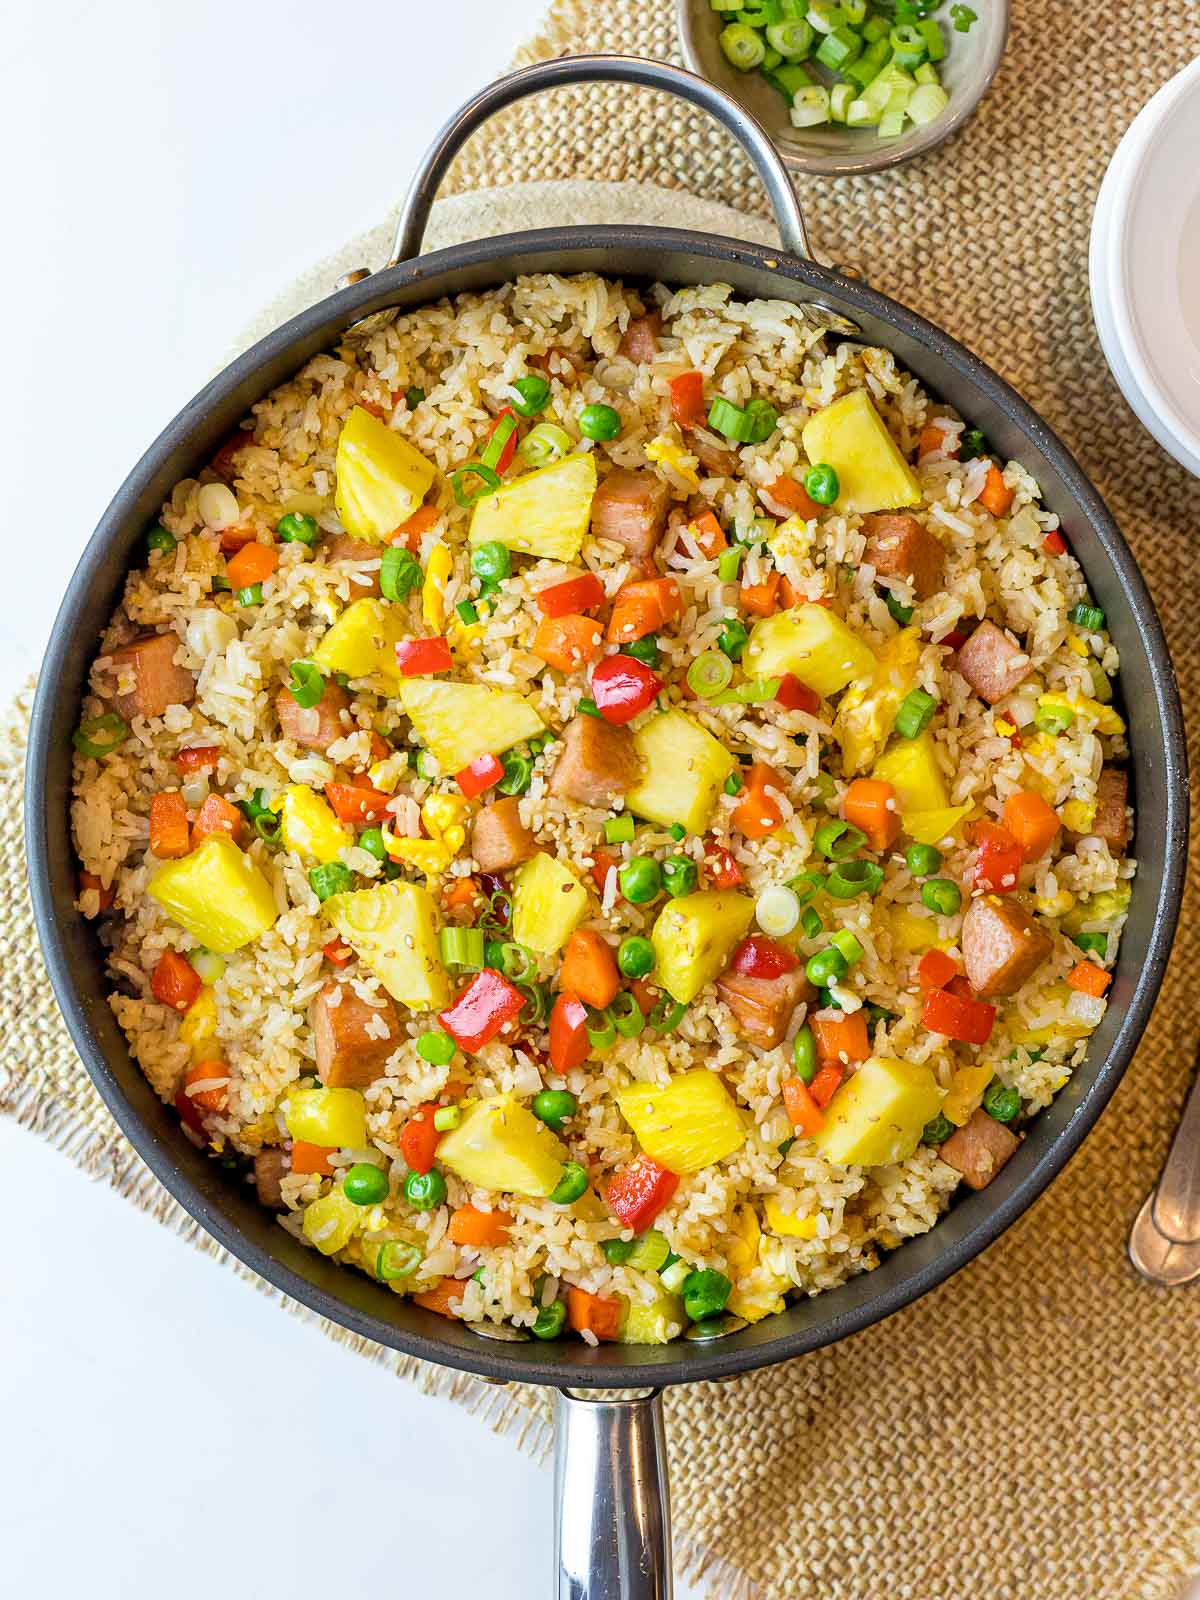 Thai pineapple fried rice with pineapples, red bell peppers, and scallions on a bamboo placemat